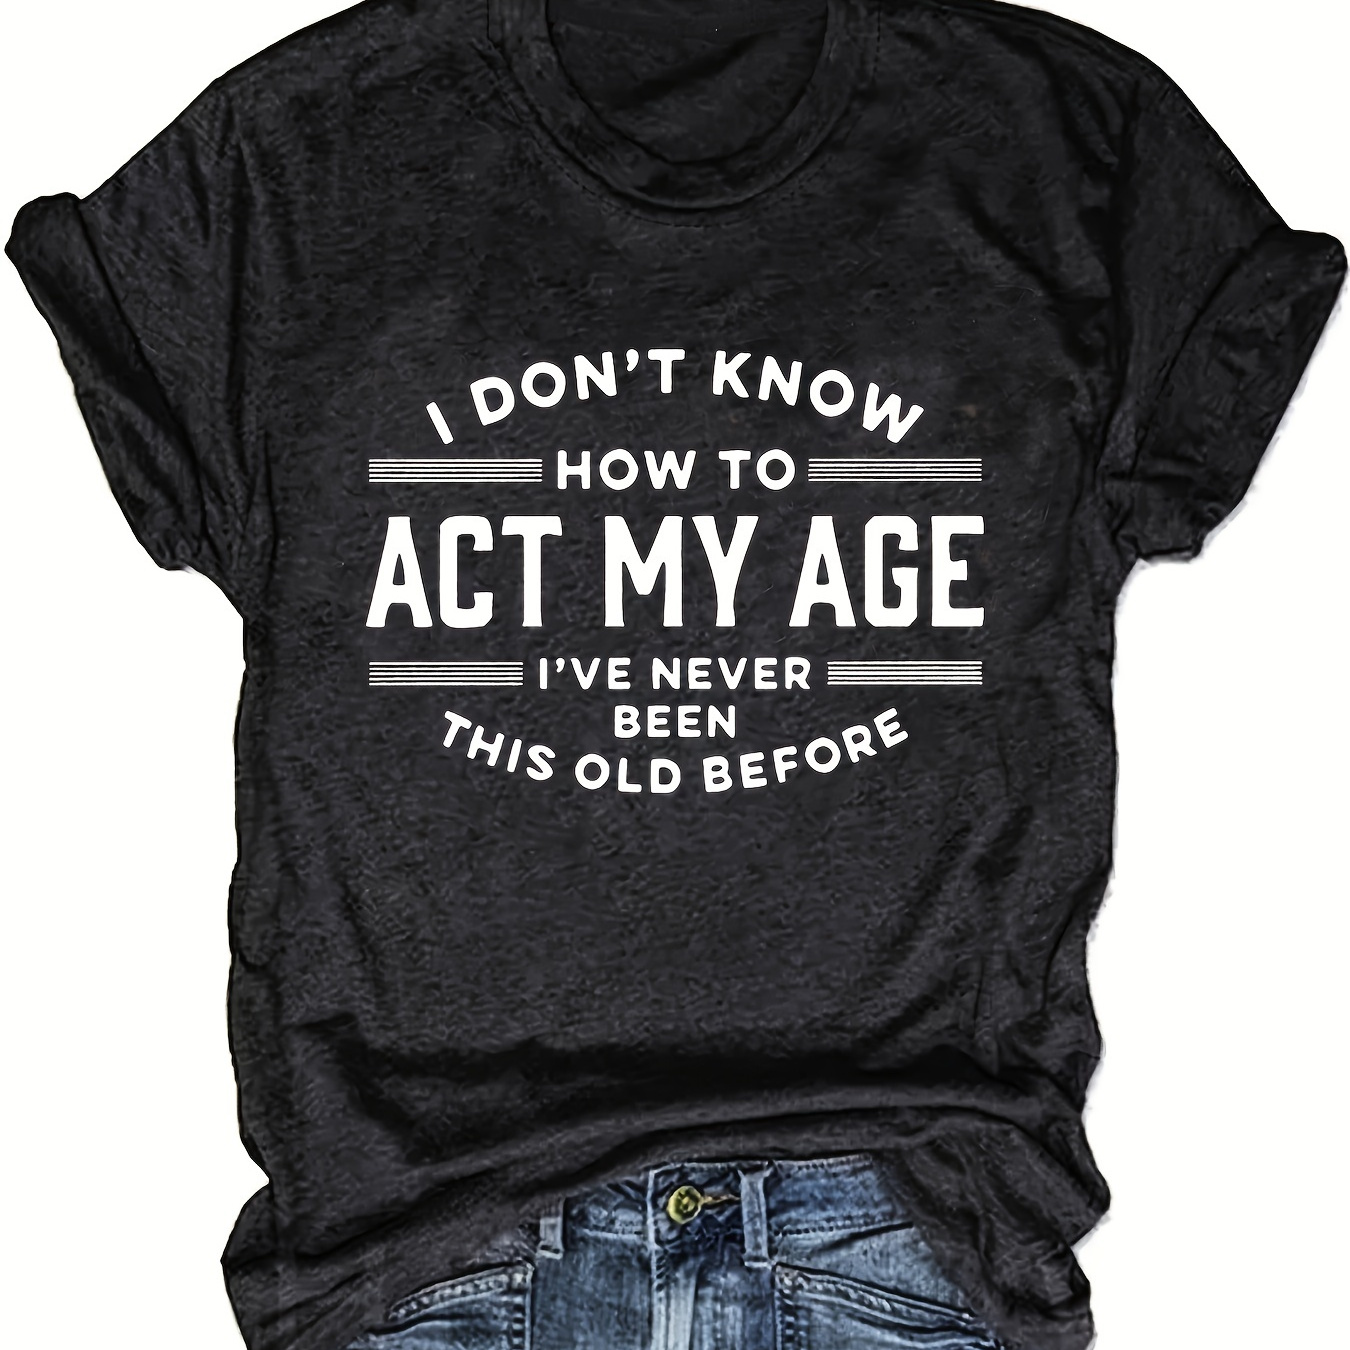 

Act My Age Print T-shirt, Short Sleeve Crew Neck Casual Top For Summer & Spring, Women's Clothing